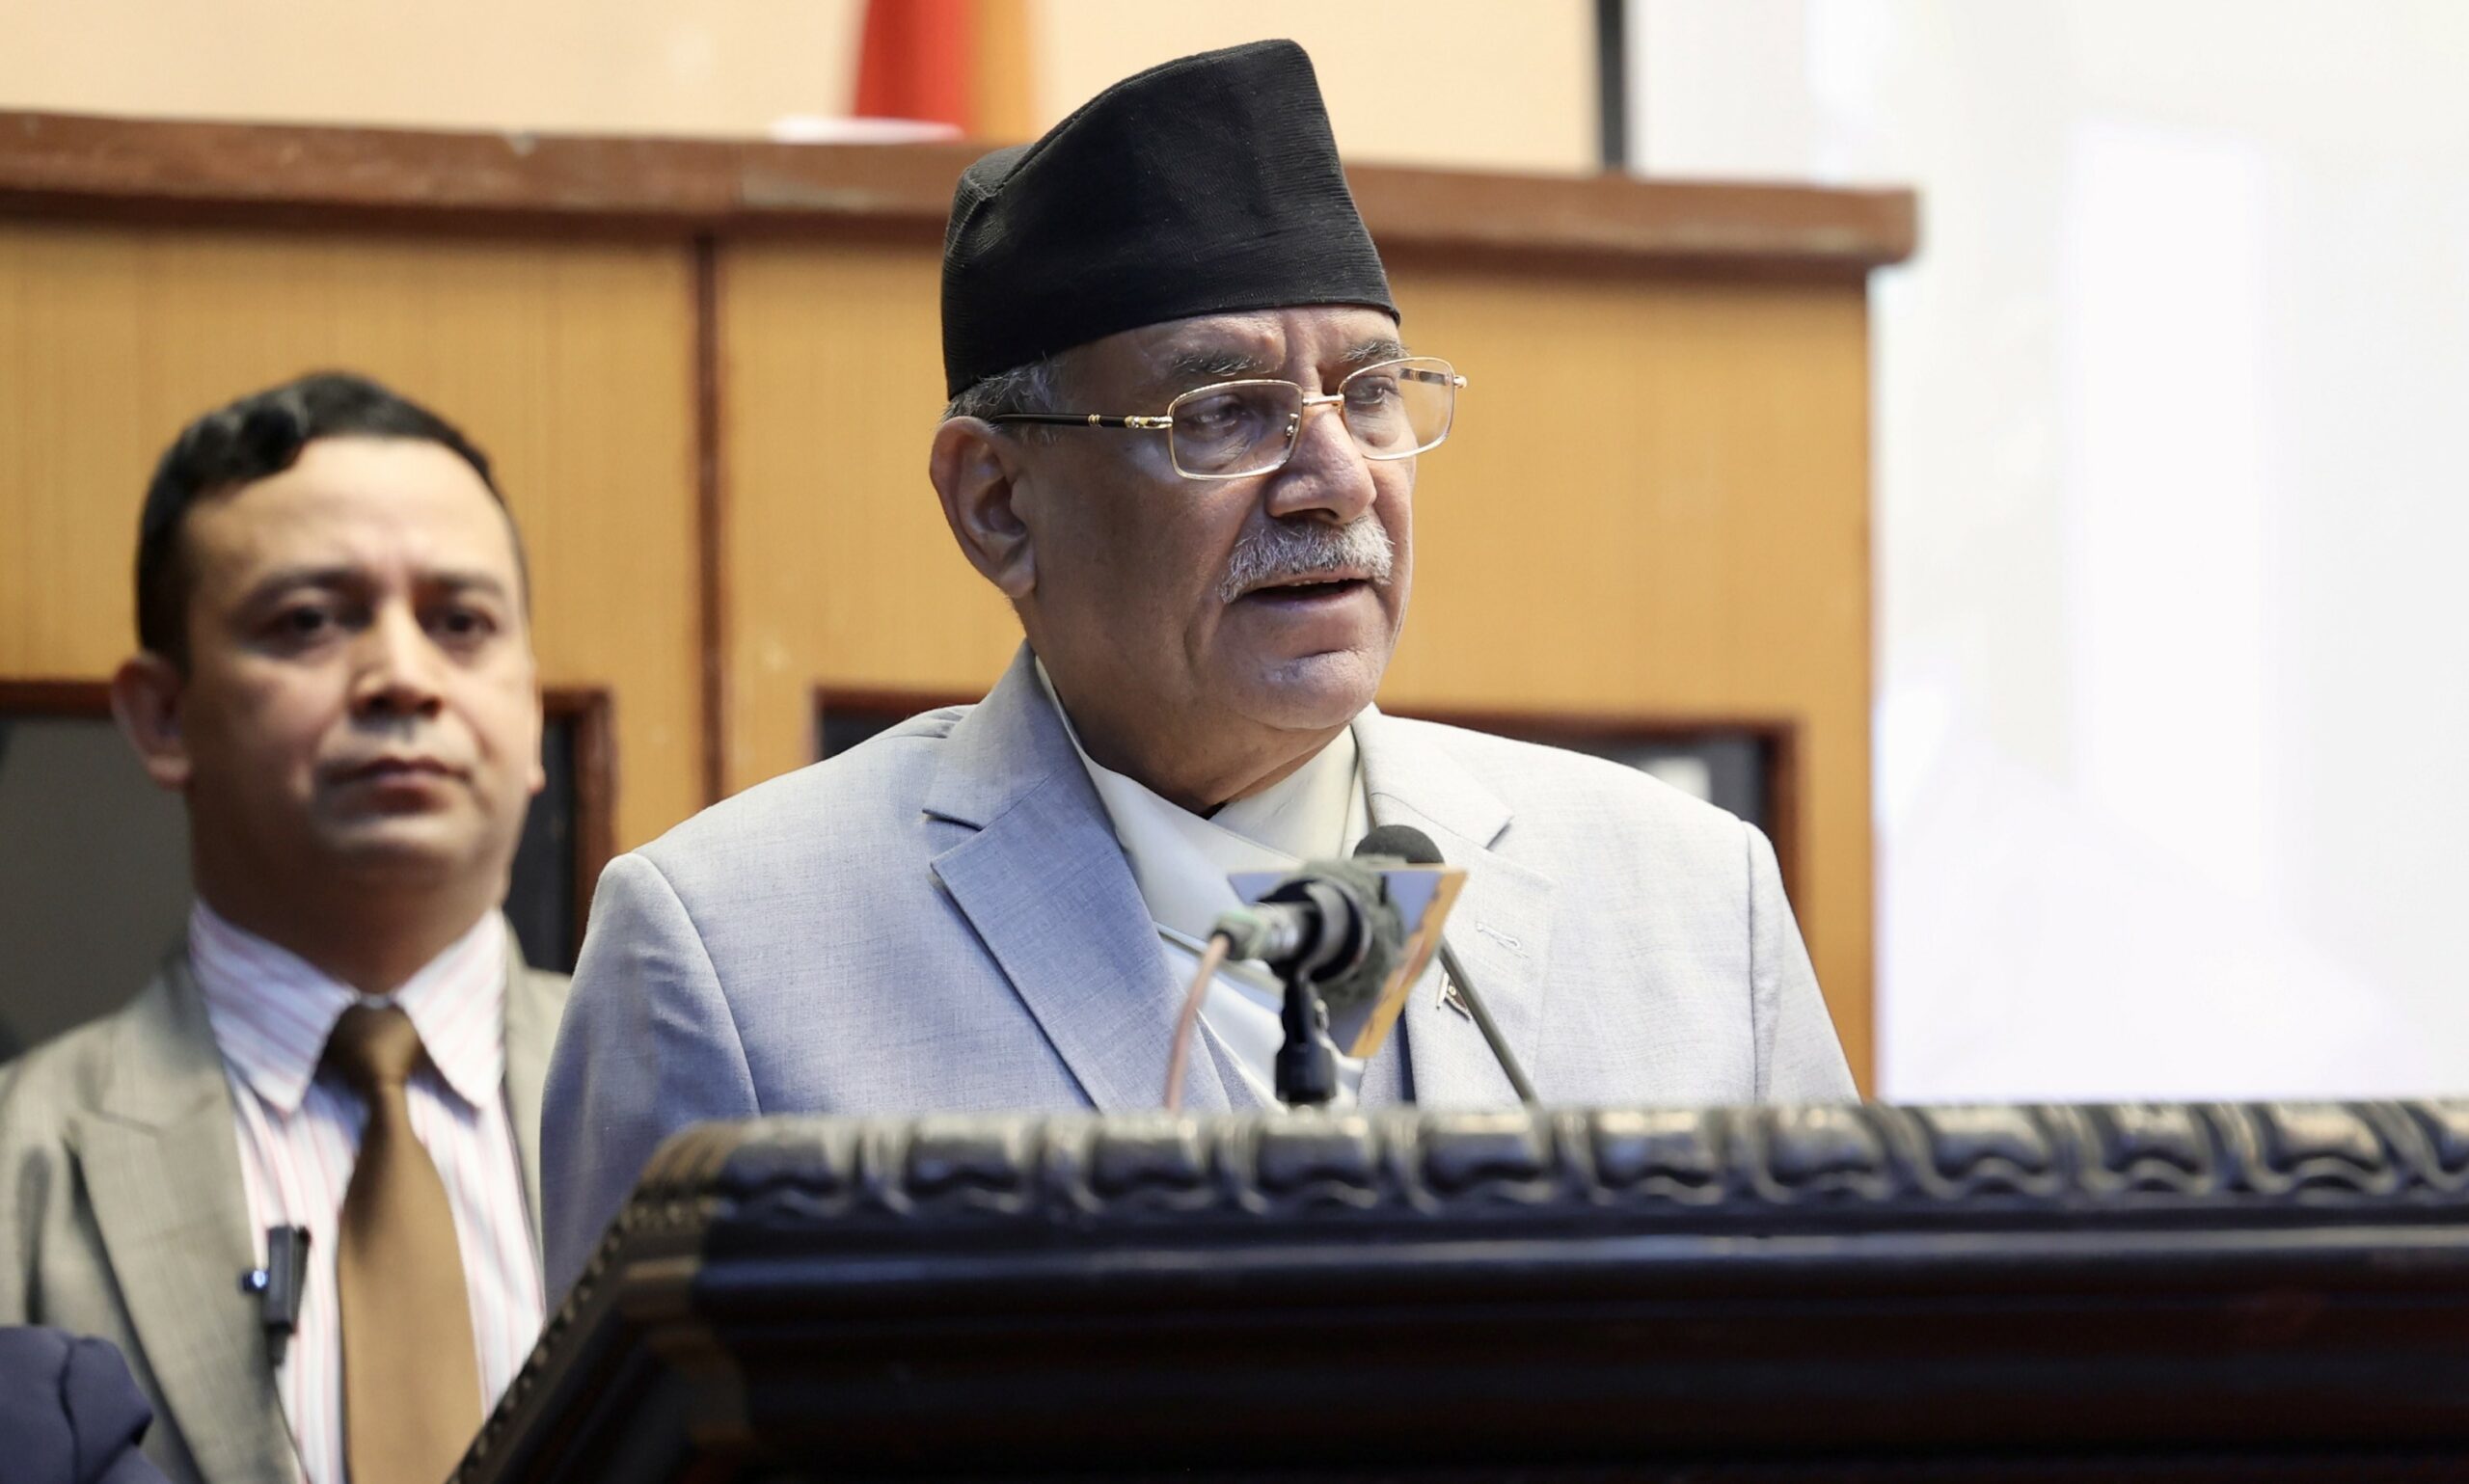 Govt committed to promoting human rights: PM Dahal